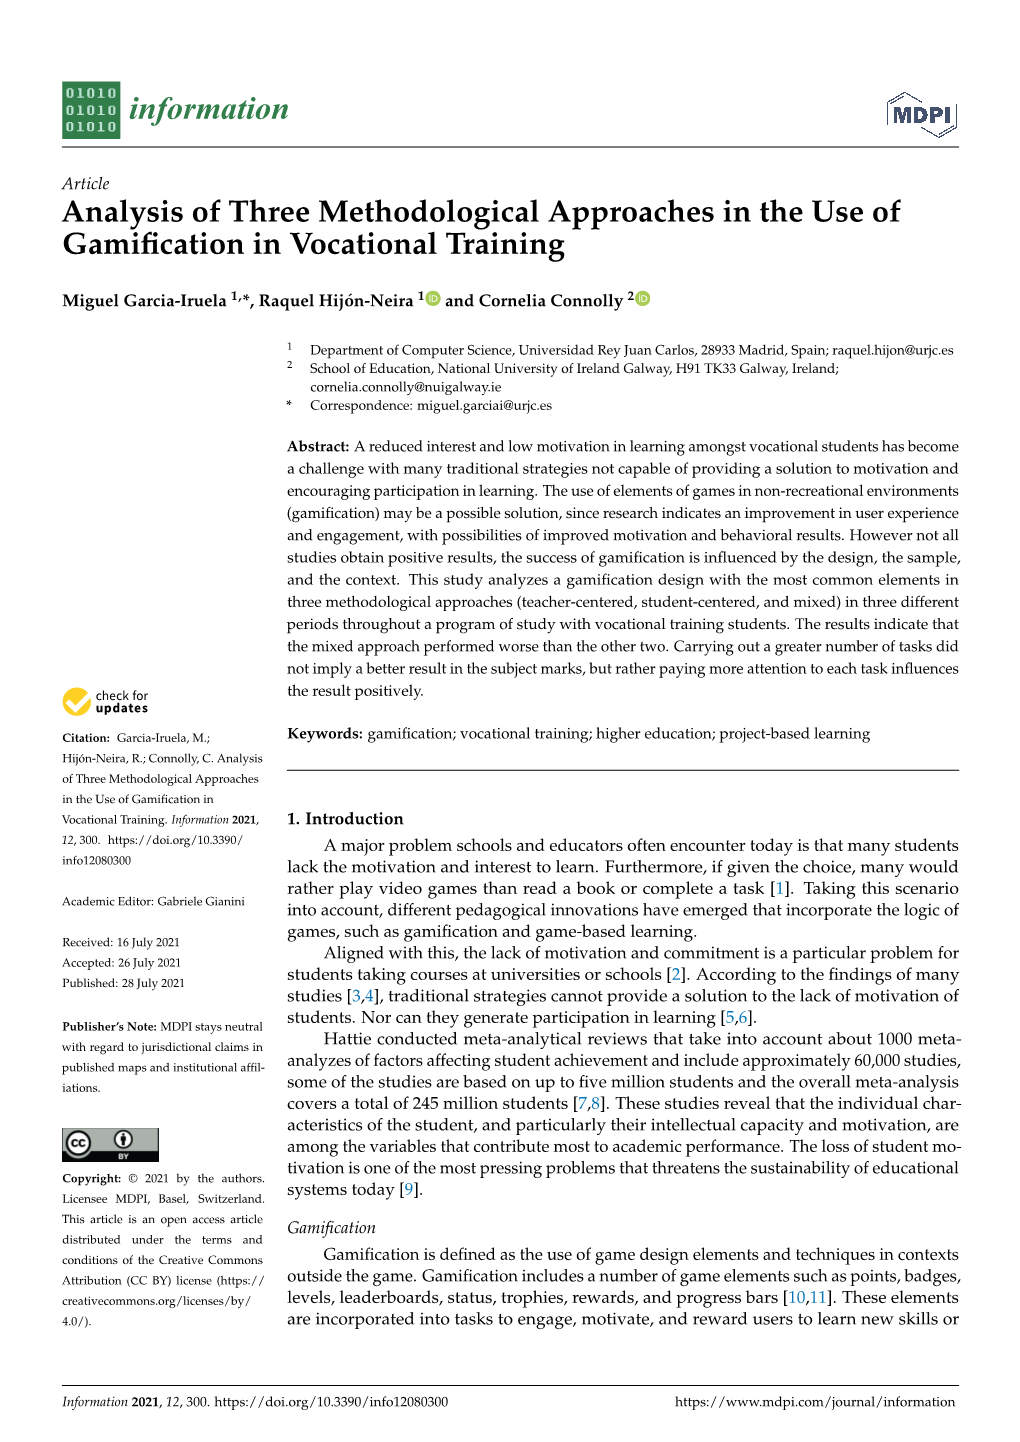 Analysis of Three Methodological Approaches in the Use of Gamiﬁcation in Vocational Training